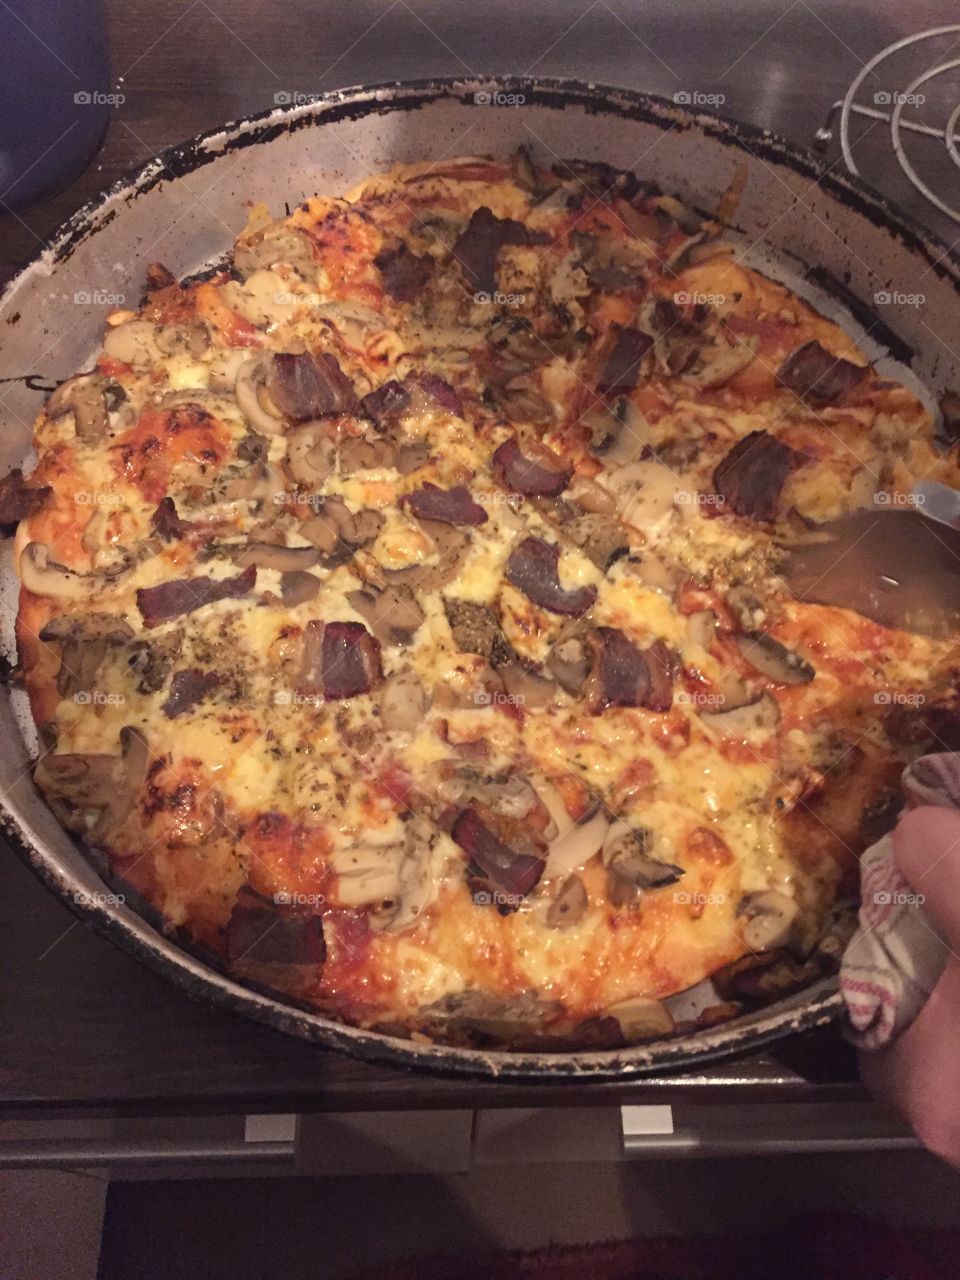 My first homemade, handmade pizza. It was very good, but not as moms 